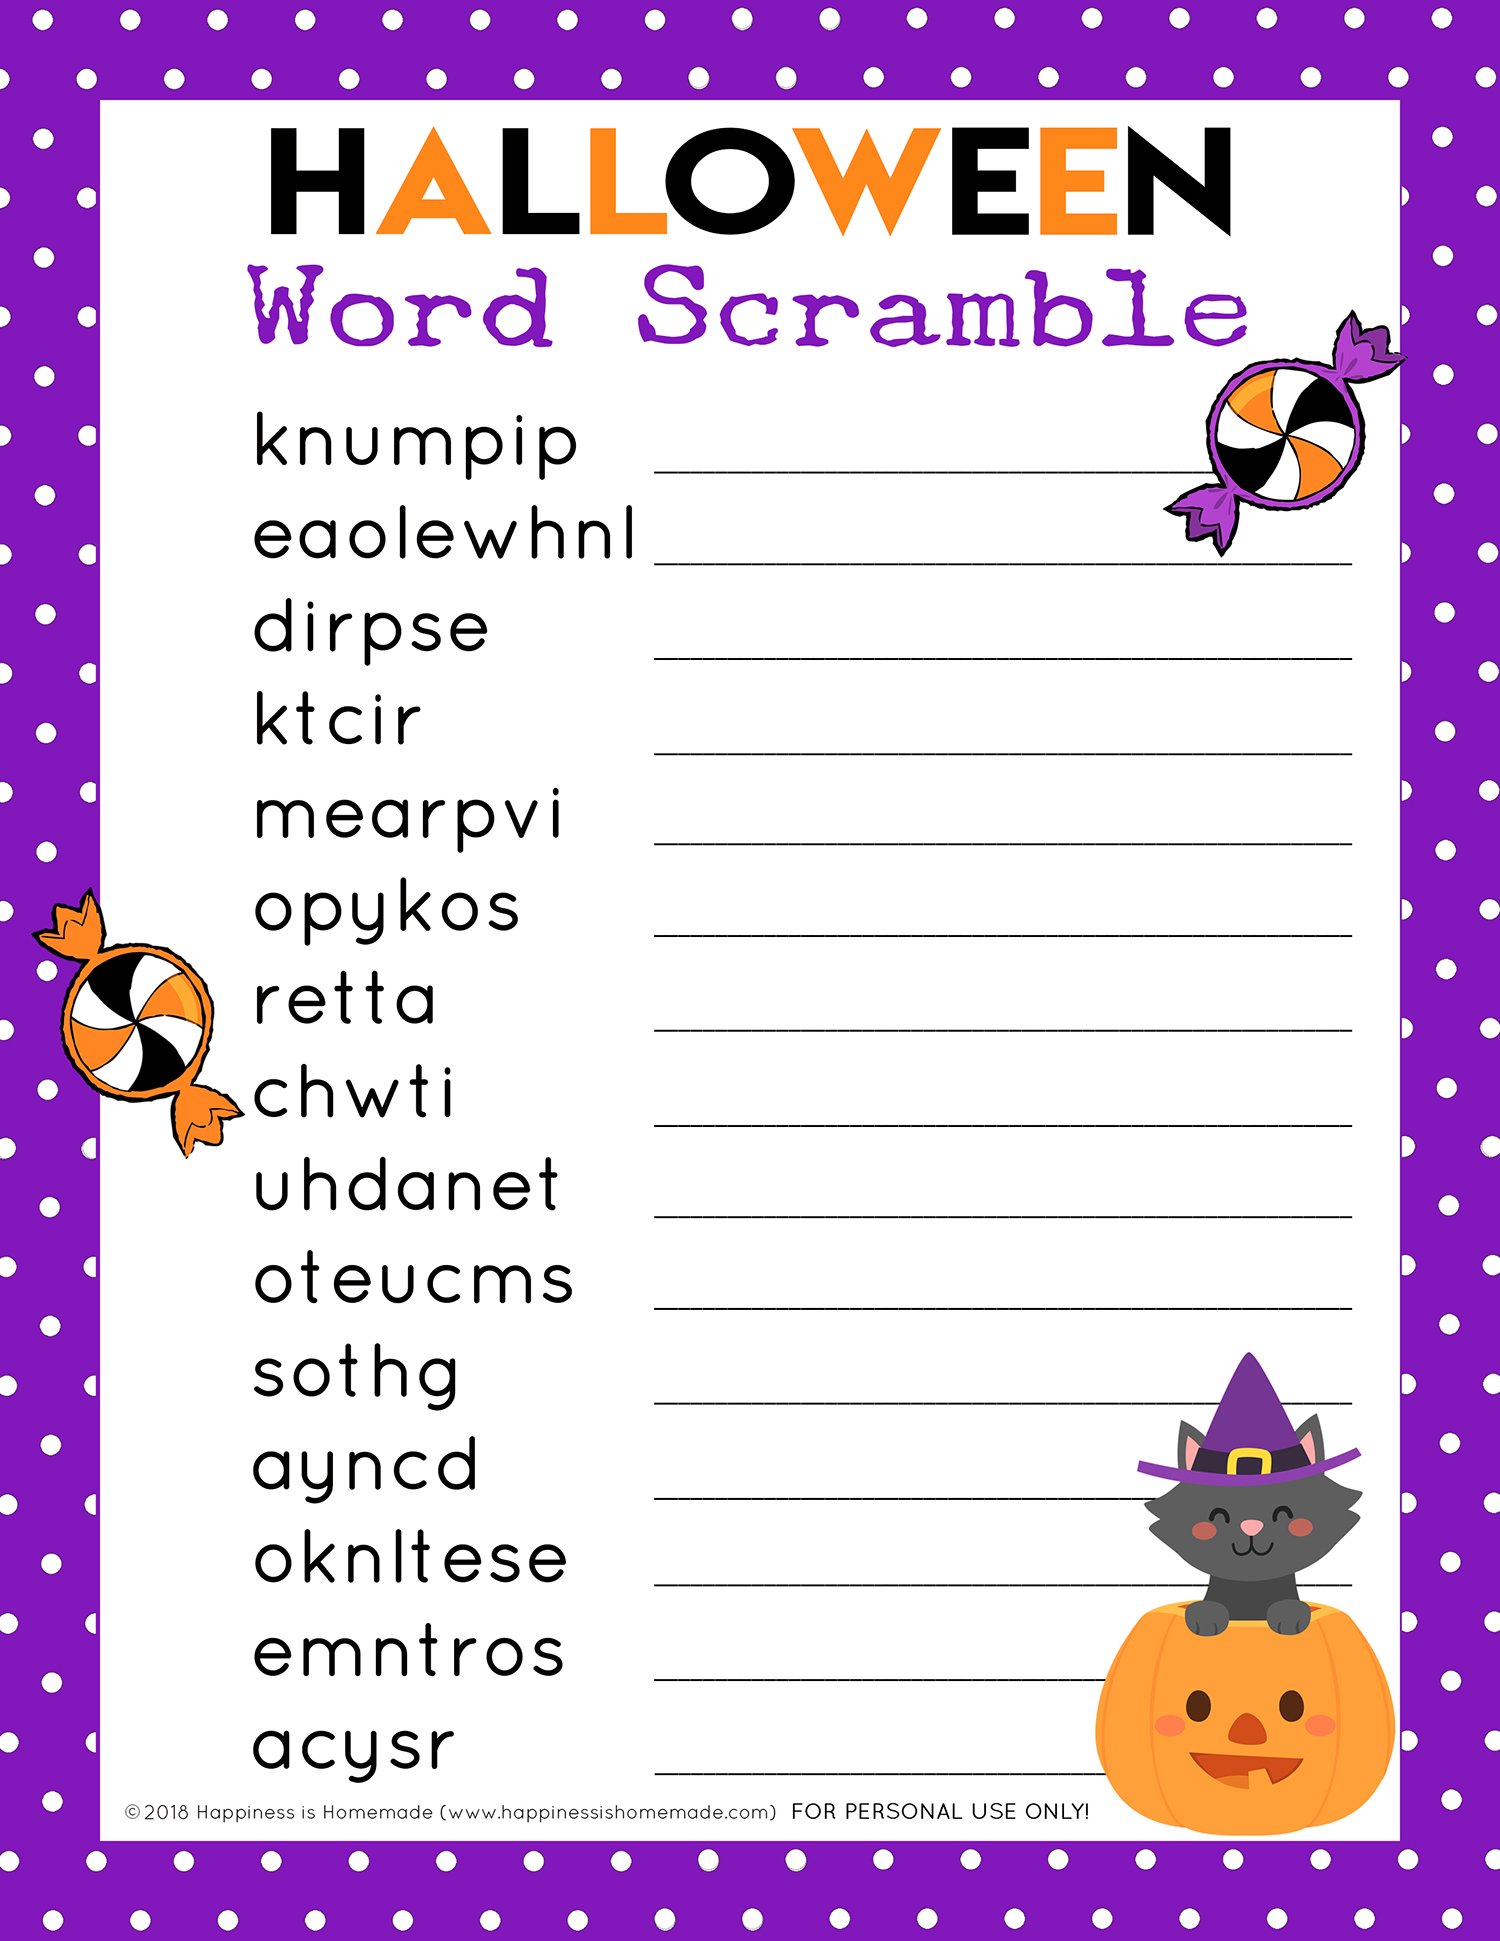 Halloween Word Scramble for Kids - Happiness is Homemade